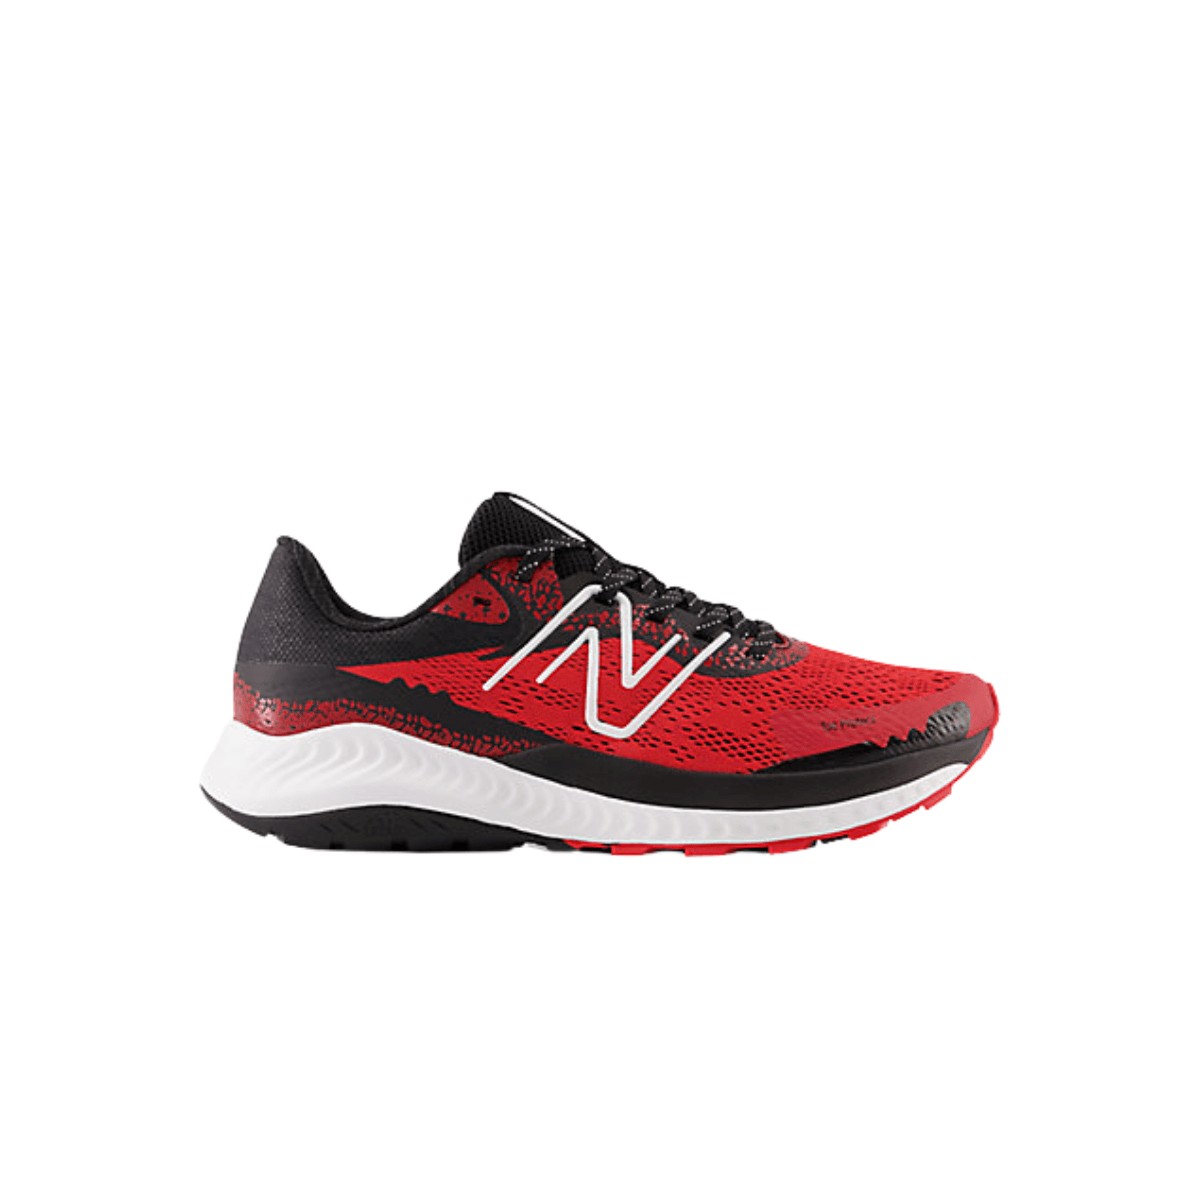 New Balance Dynasoft Nitrel V5 Chaussures Noir Rouge AW22, Taille 42 - EUR